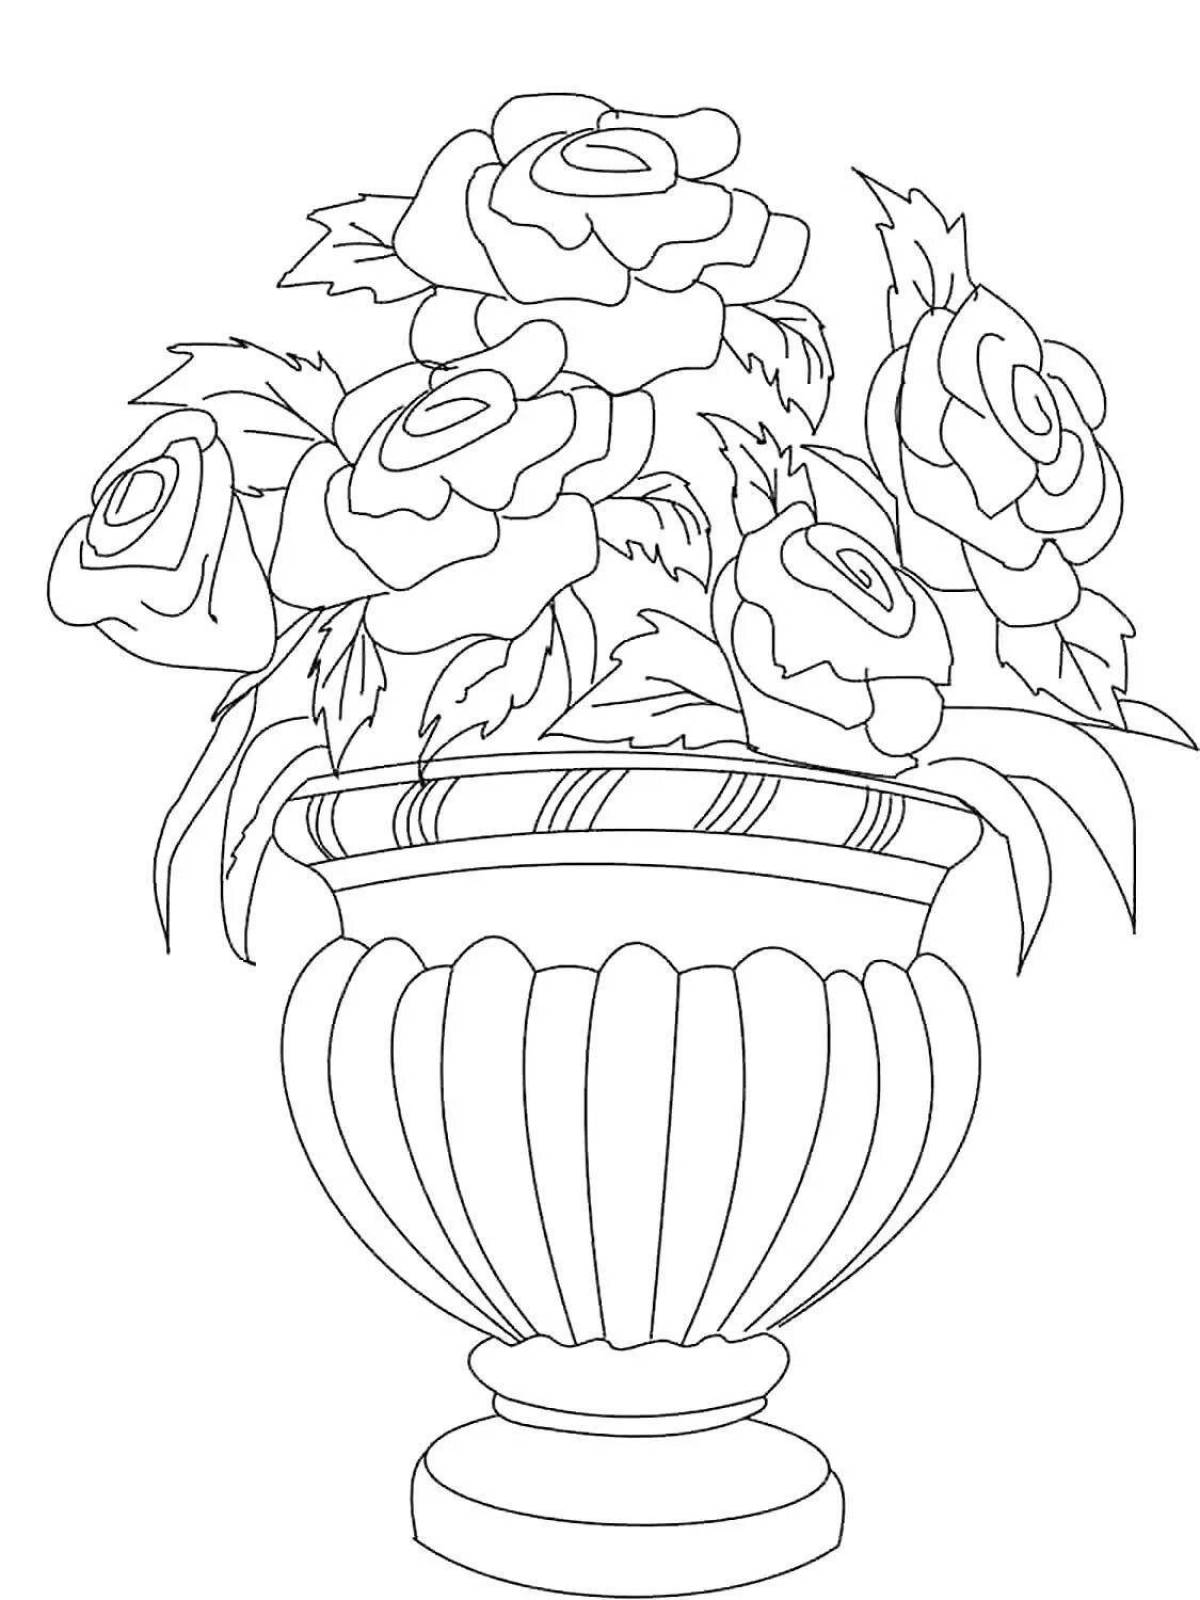 Blissful vase of flowers coloring book for children